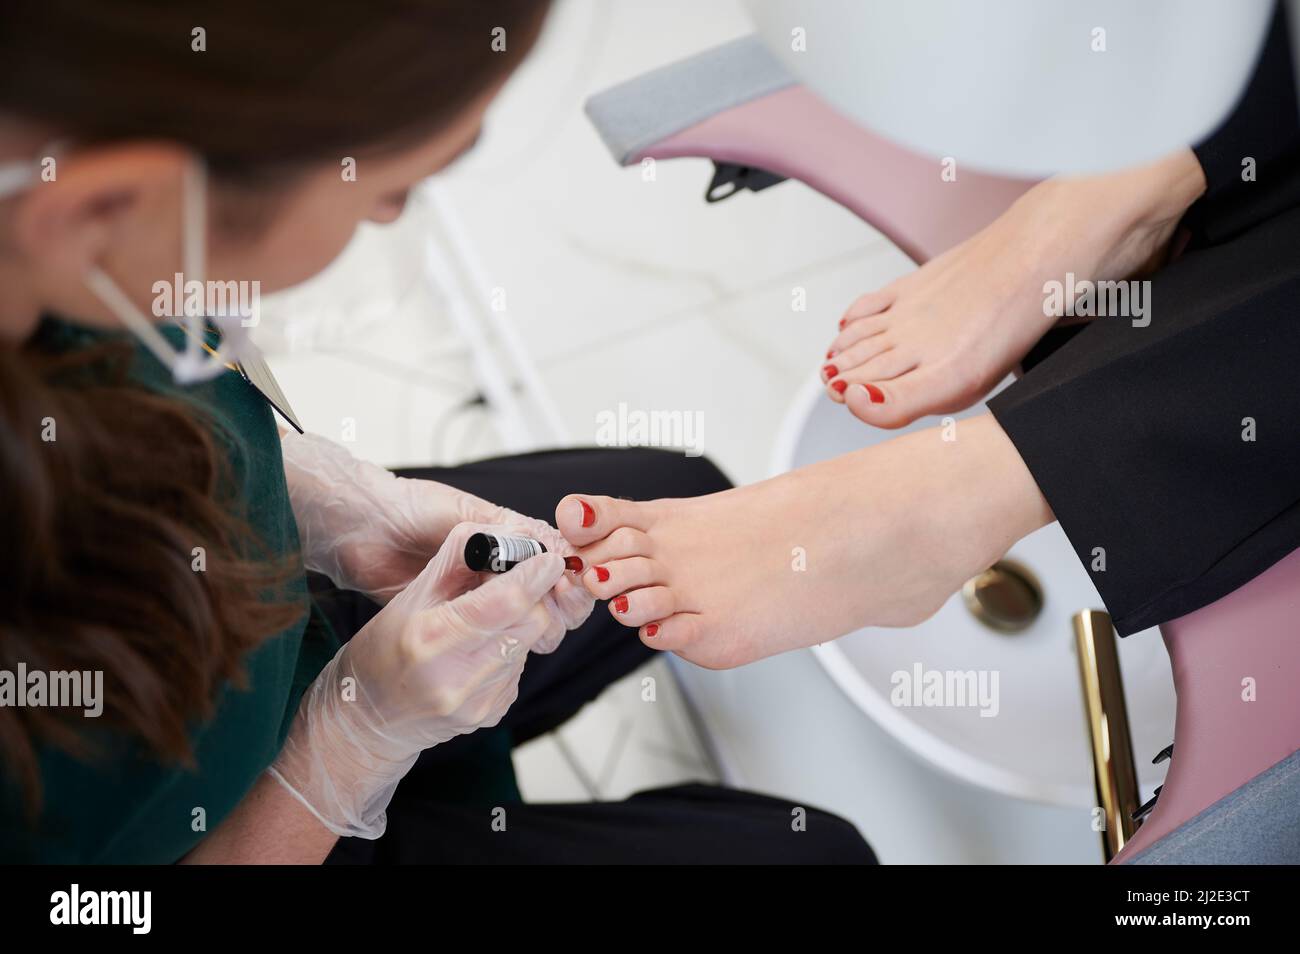 Nail specialist doing pedicure for client in beauty salon. Close up of female hands in sterile gloves touching woman foot while applying red nail polish on toenails. Stock Photo